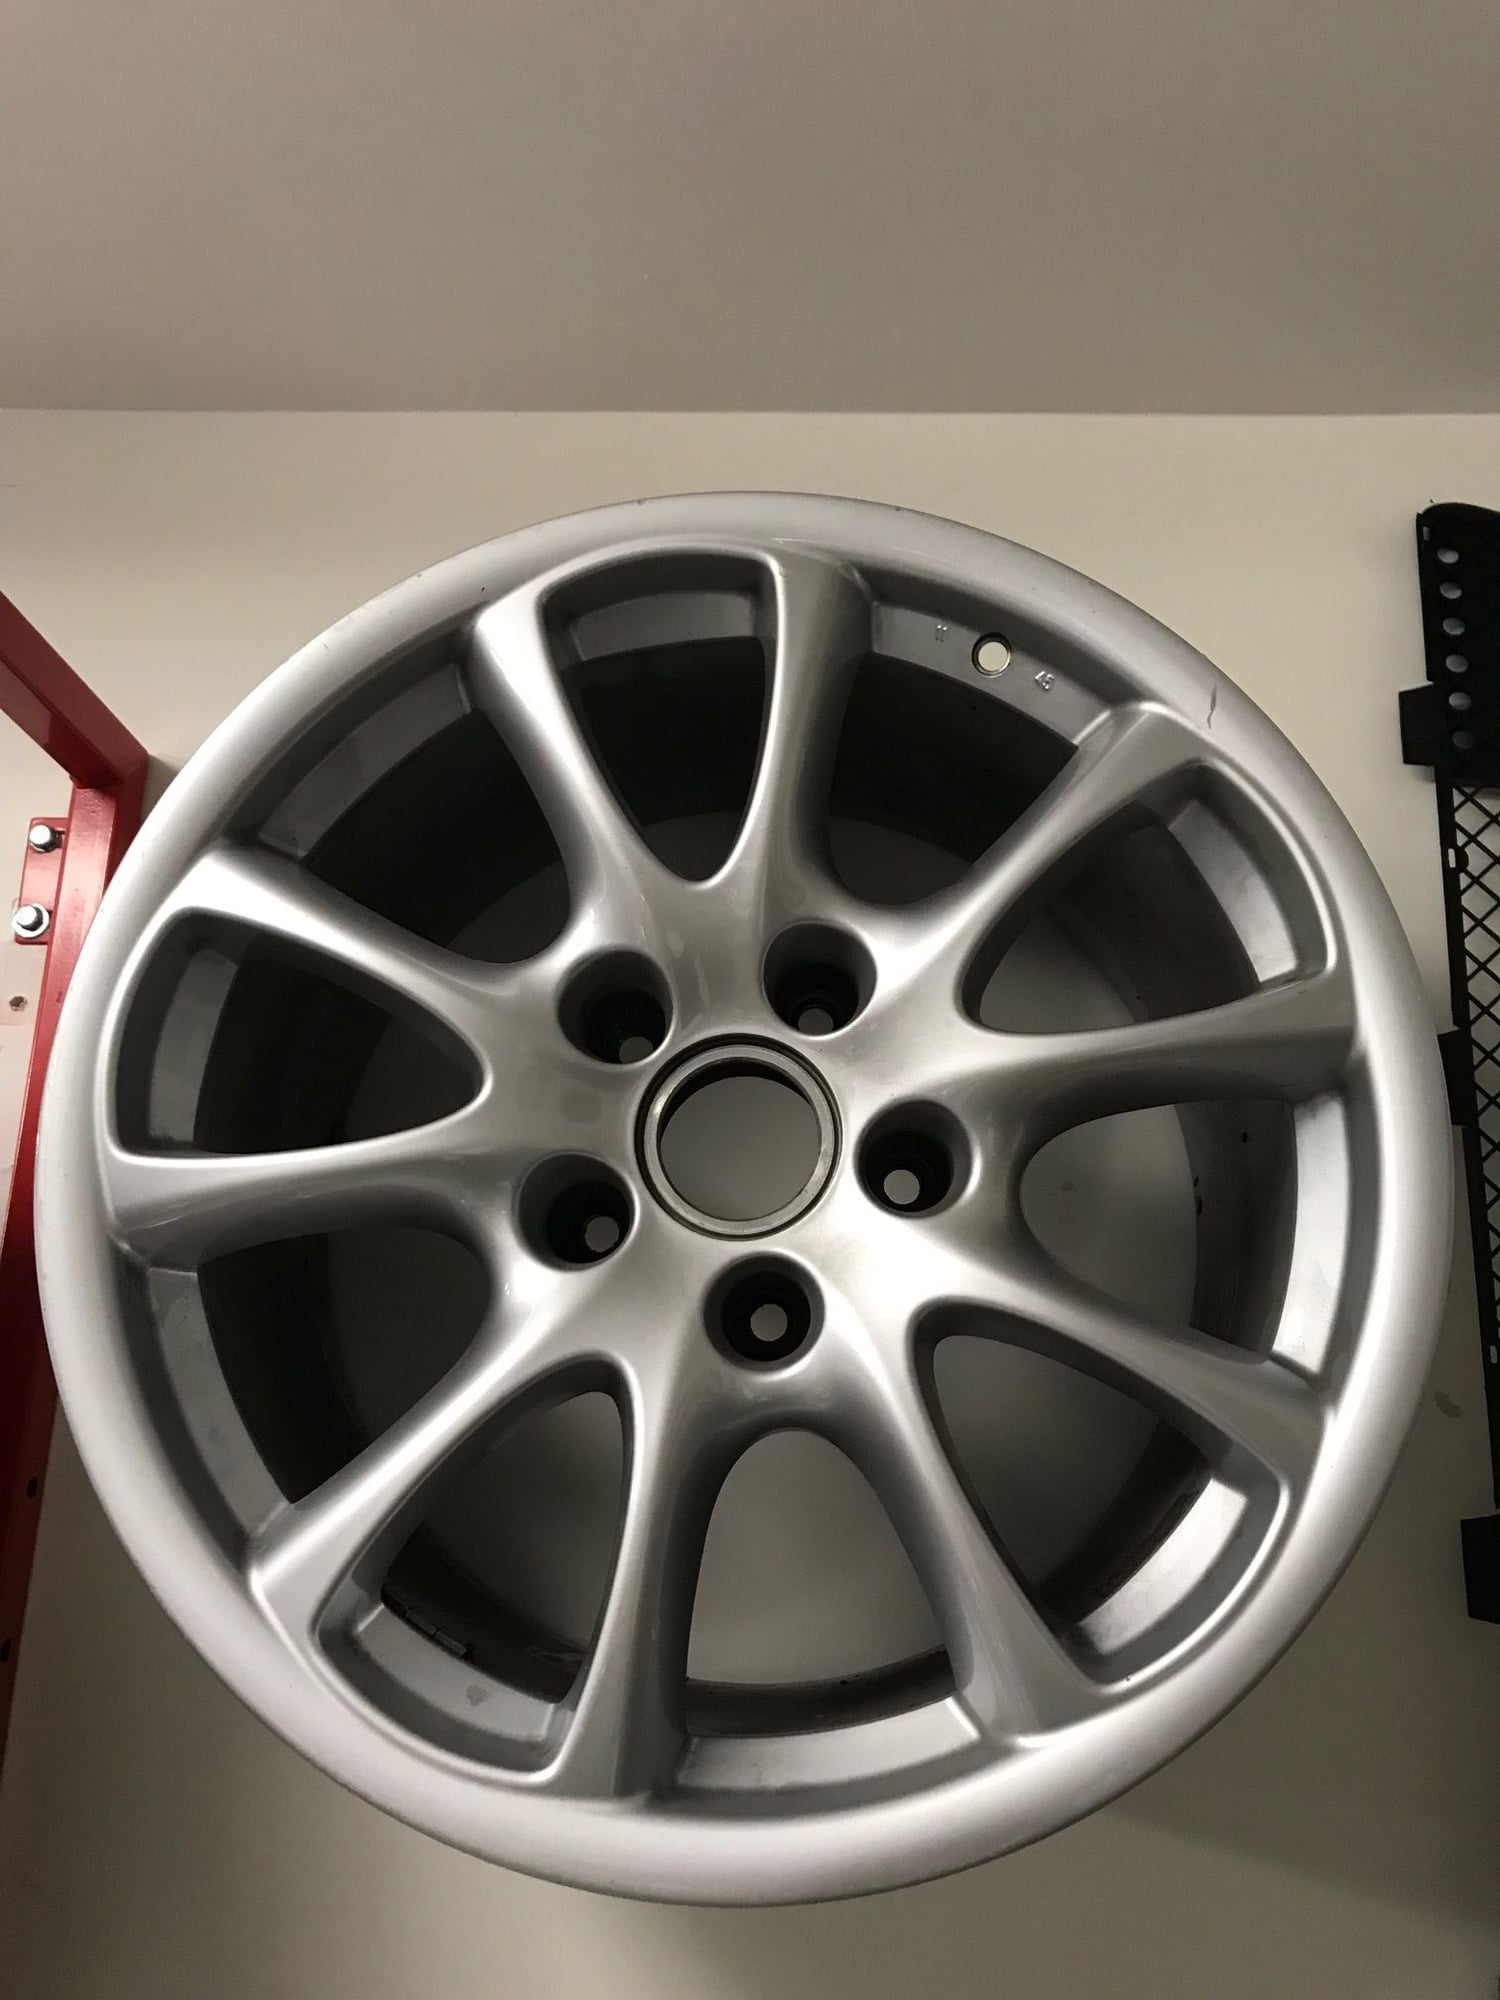 Wheels and Tires/Axles - OEM 996 Turbo GT3 style wheels - Used - 2001 to 2005 Porsche 911 - Los Angeles, CA 90731, United States